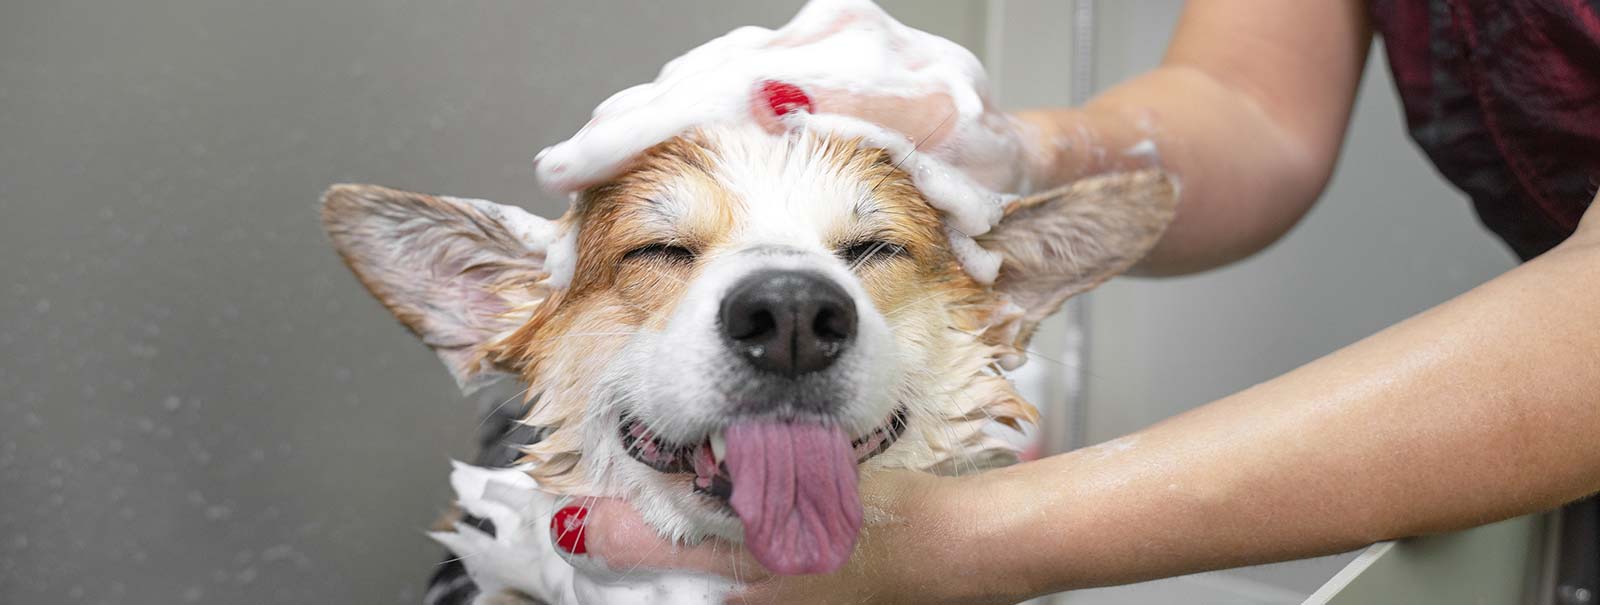 Dog & Puppy Grooming